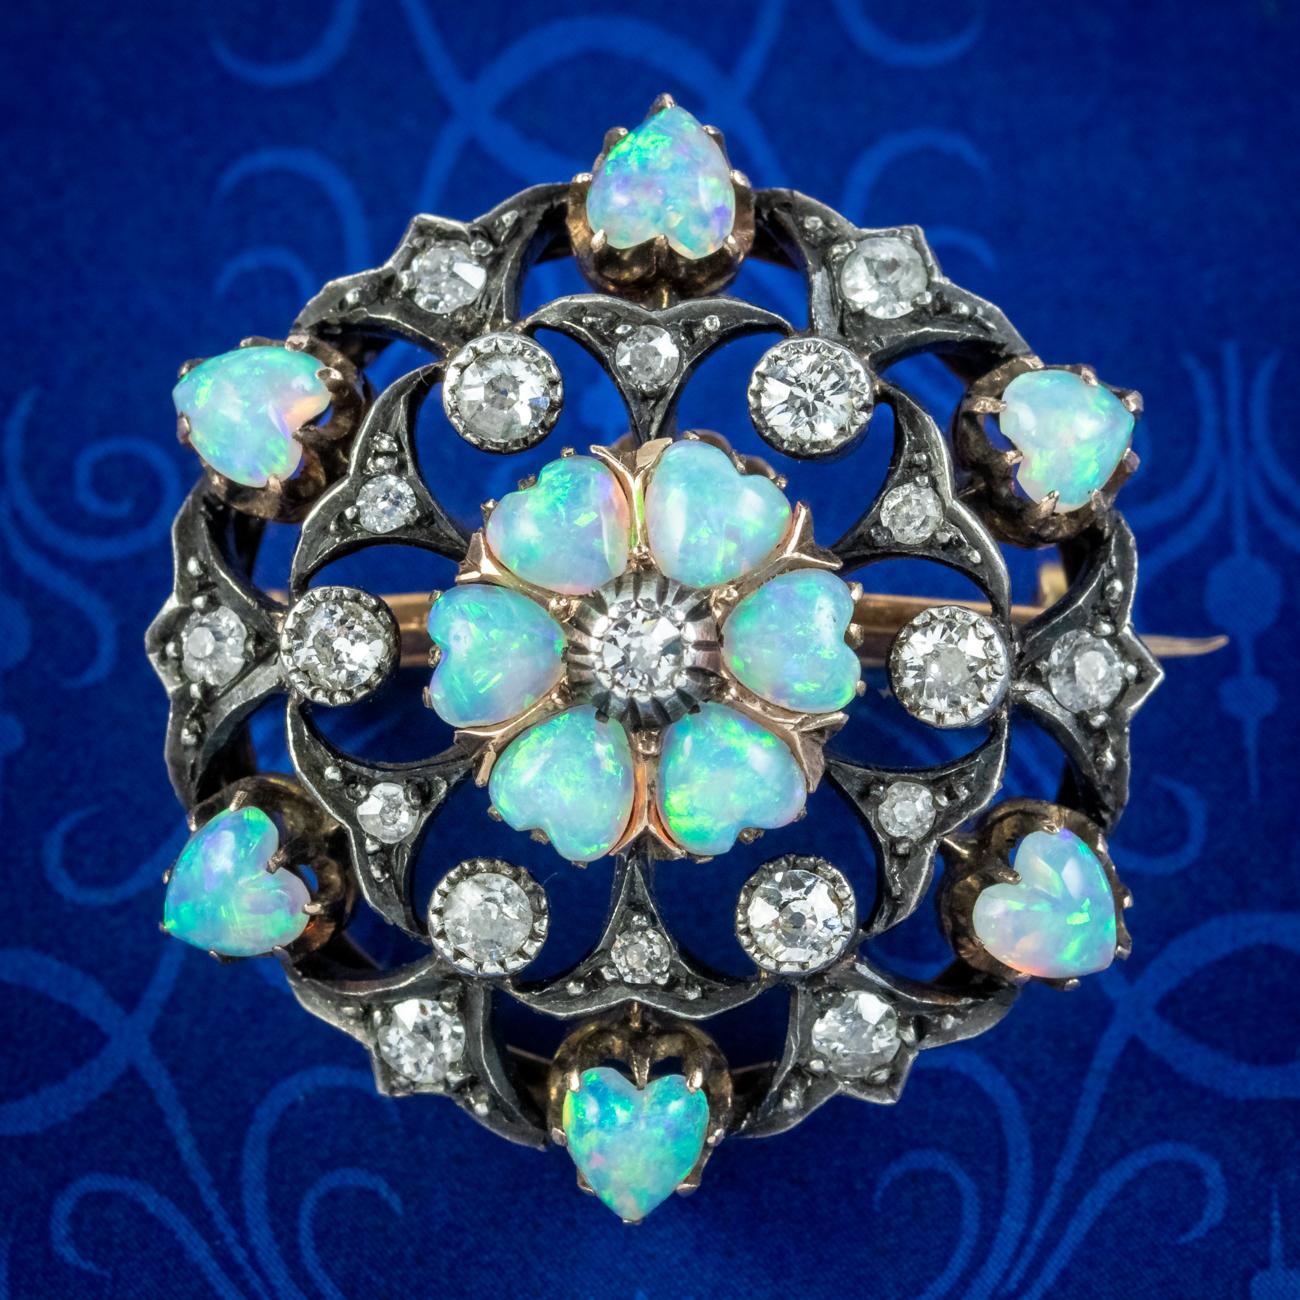 A glorious antique Victorian brooch depicting a flower decorated with nineteen glistening old mine cut diamonds and twelve heart cut opal petals in a fabulous, tiered arrangement.  

The opal hearts display a beautiful rainbow of vibrant colours and